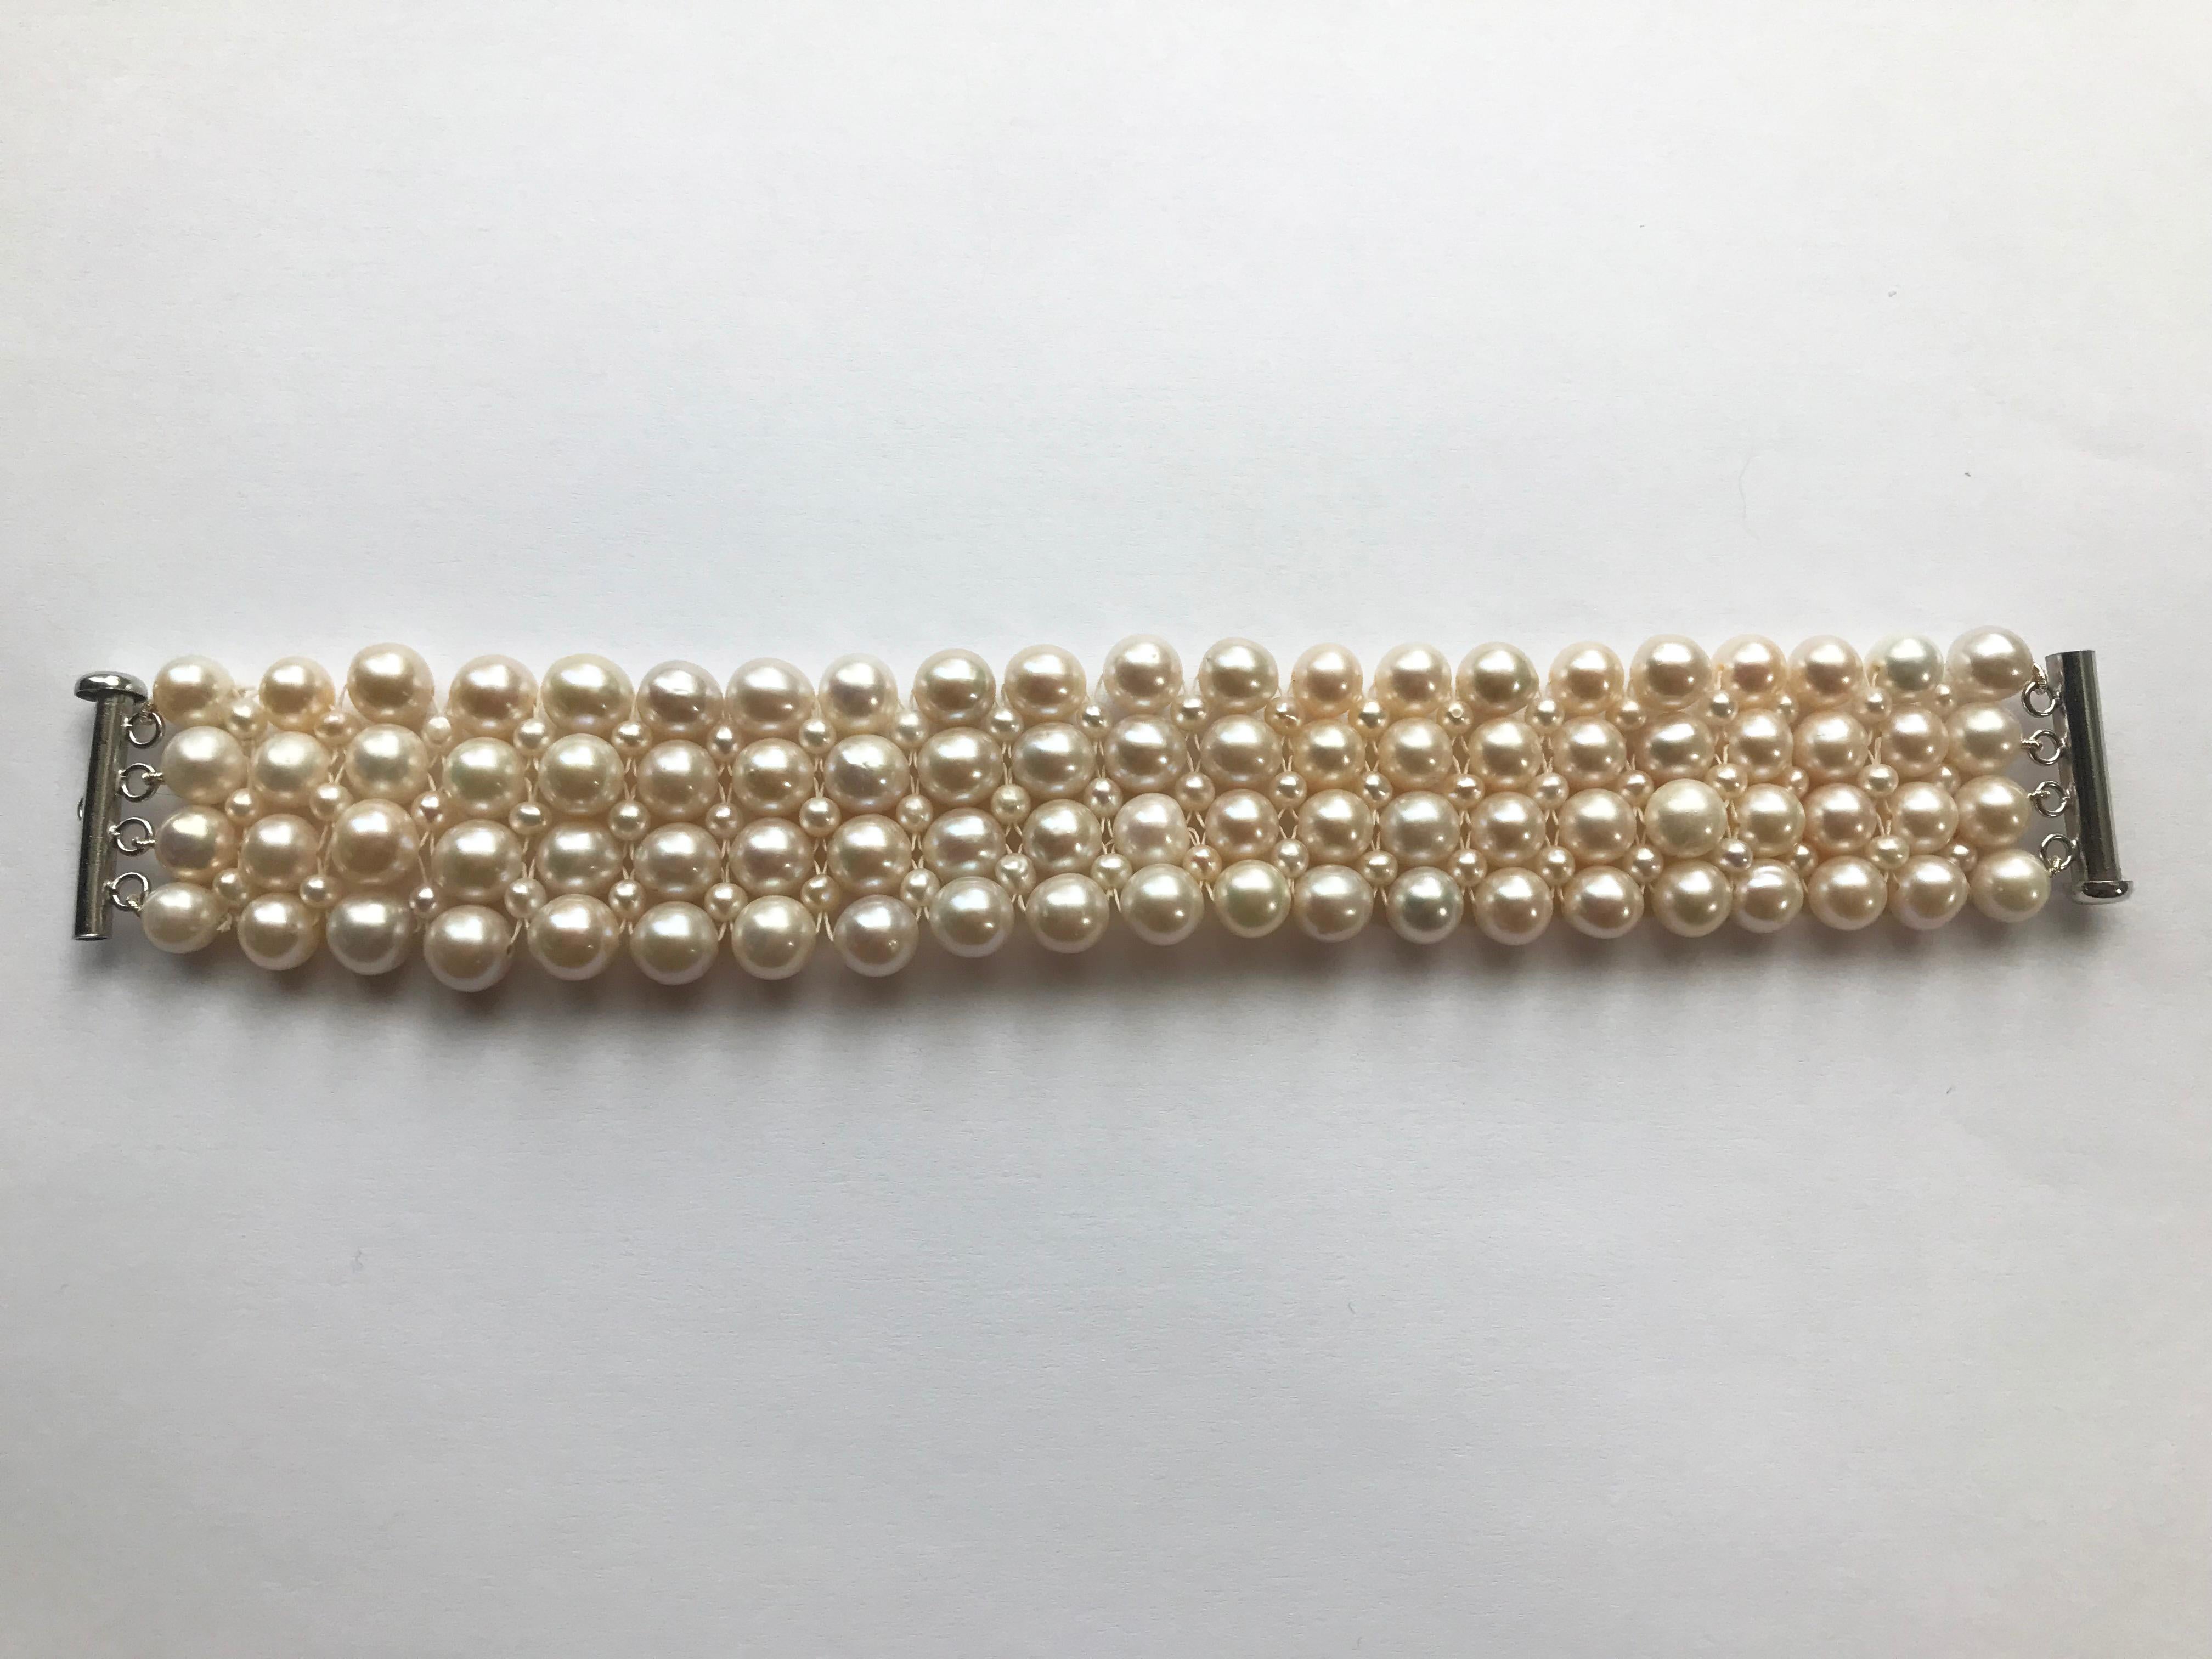 Marina J. Woven Pearl Bracelet with 14 Karat Yellow Gold-Plated Clasp For Sale 5